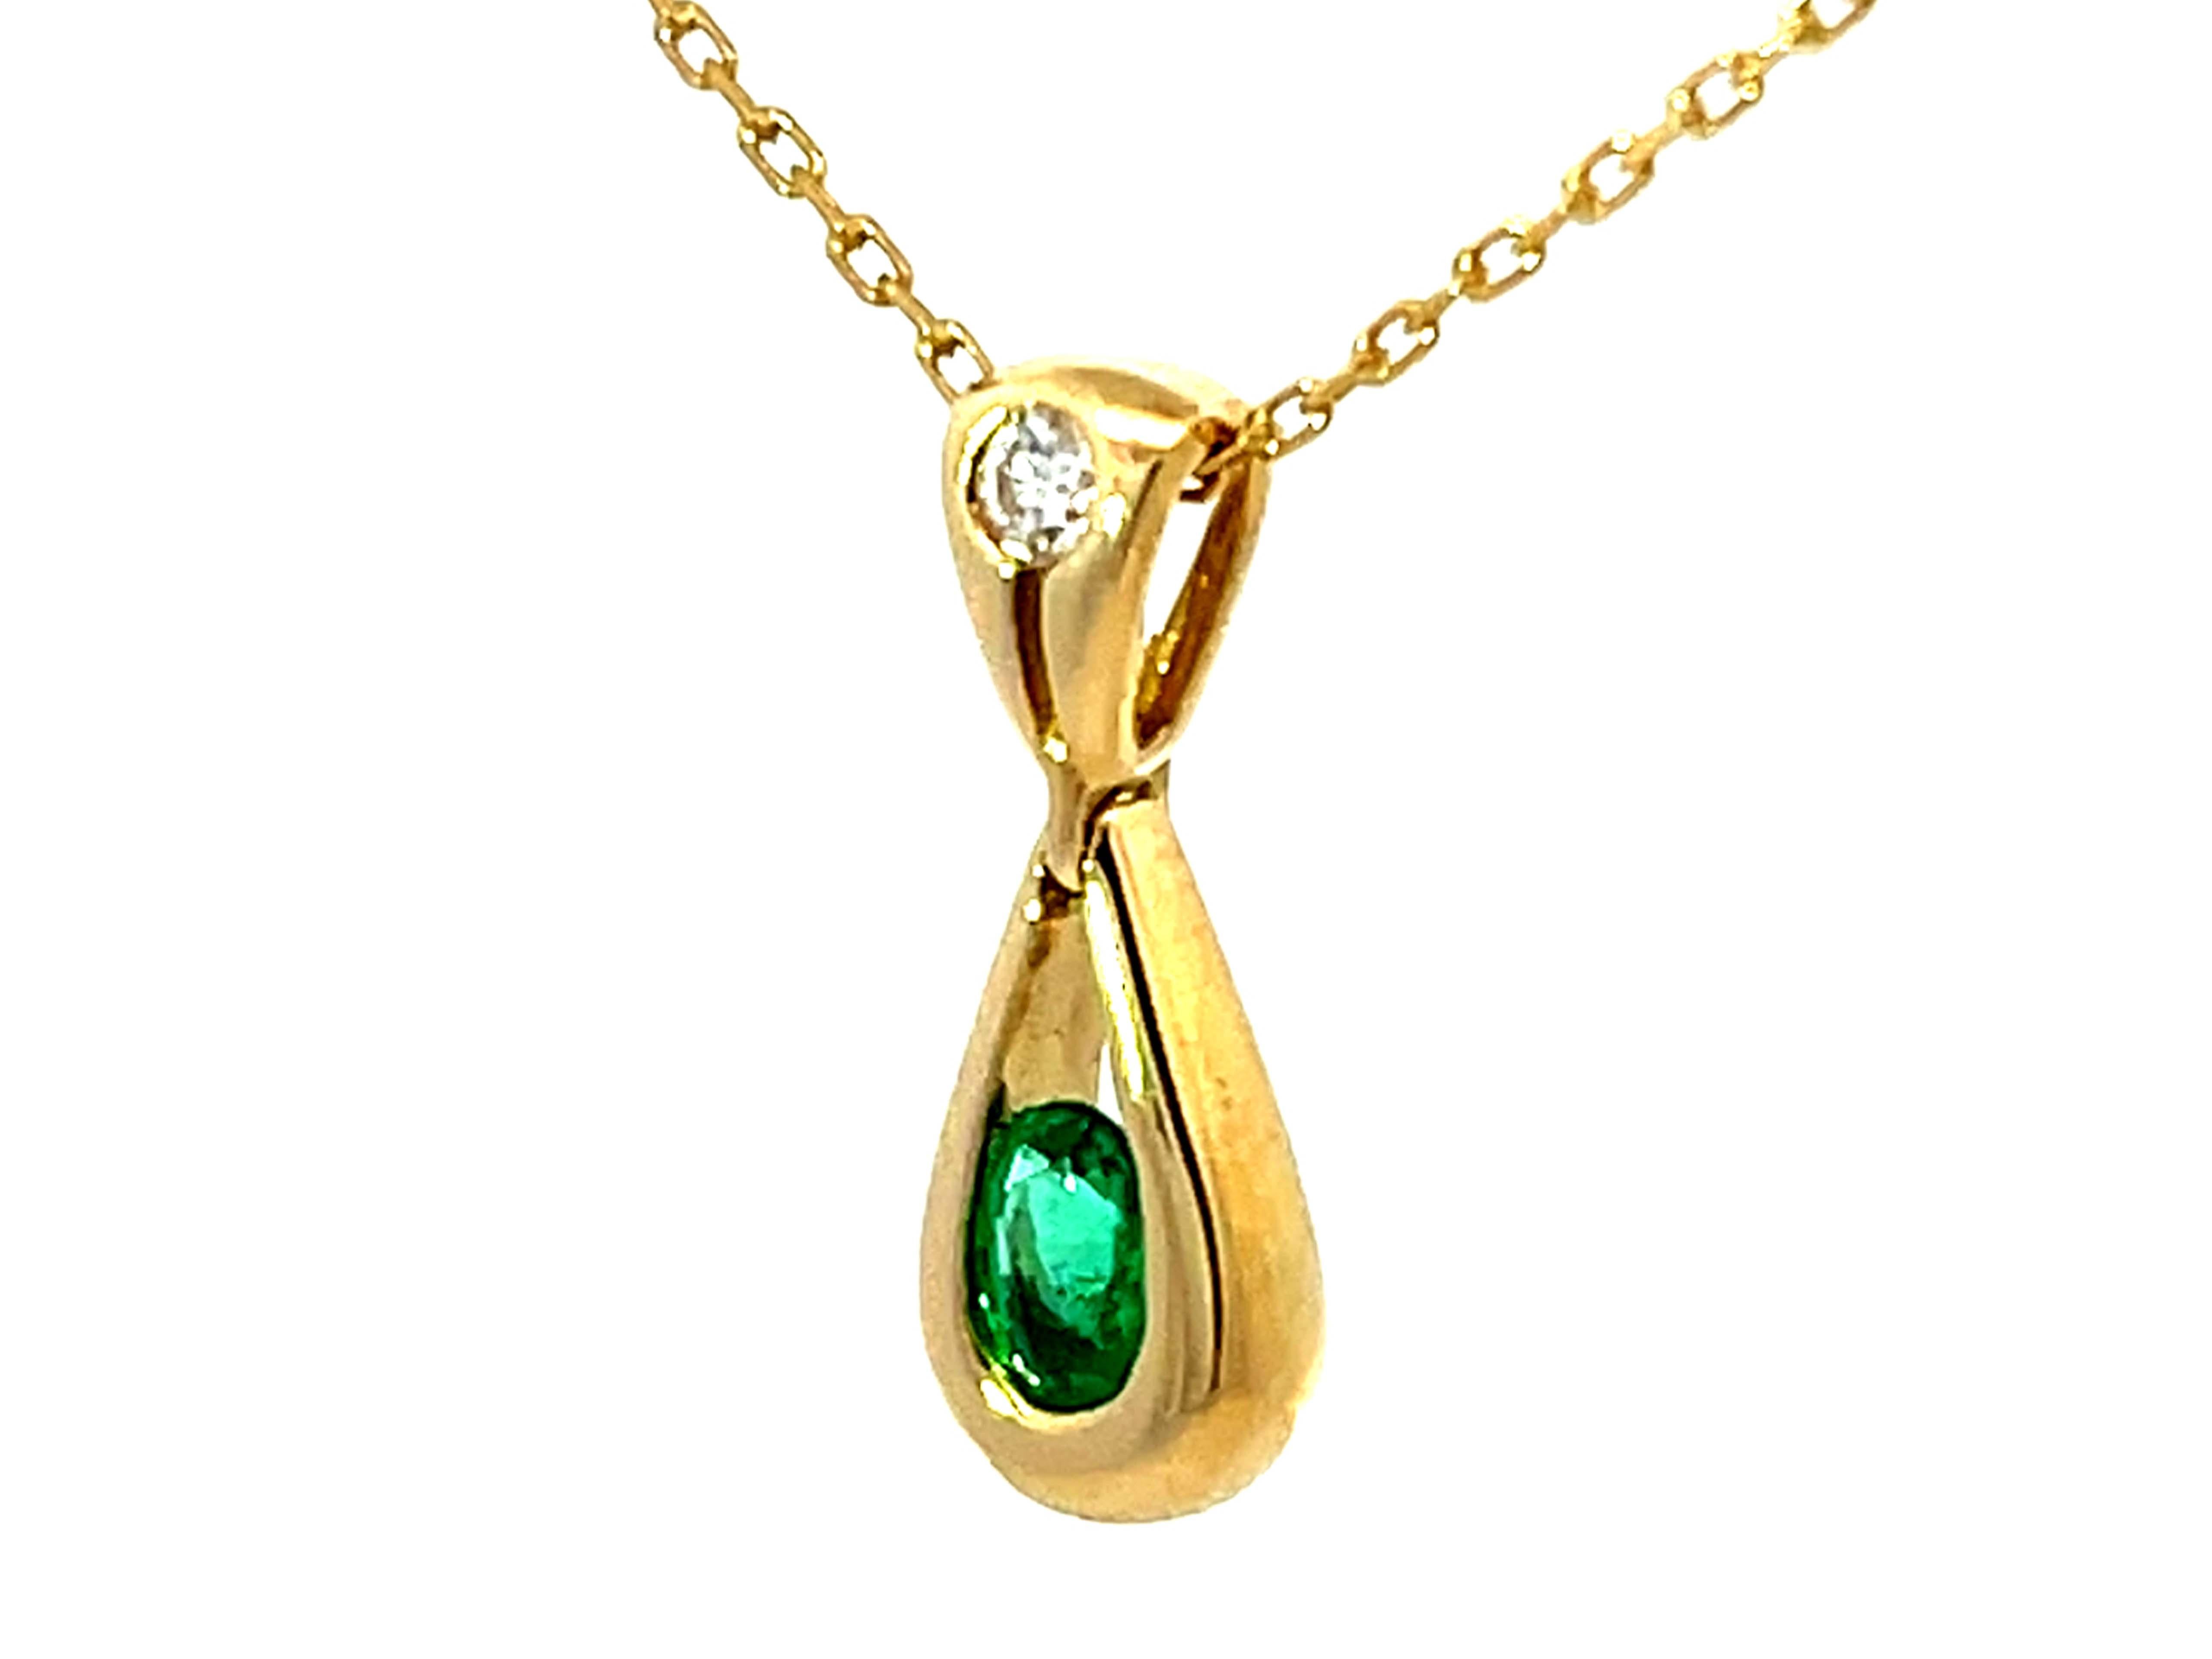 Brilliant Cut Dangly Emerald Diamond Necklace Solid 18K Yellow Gold For Sale